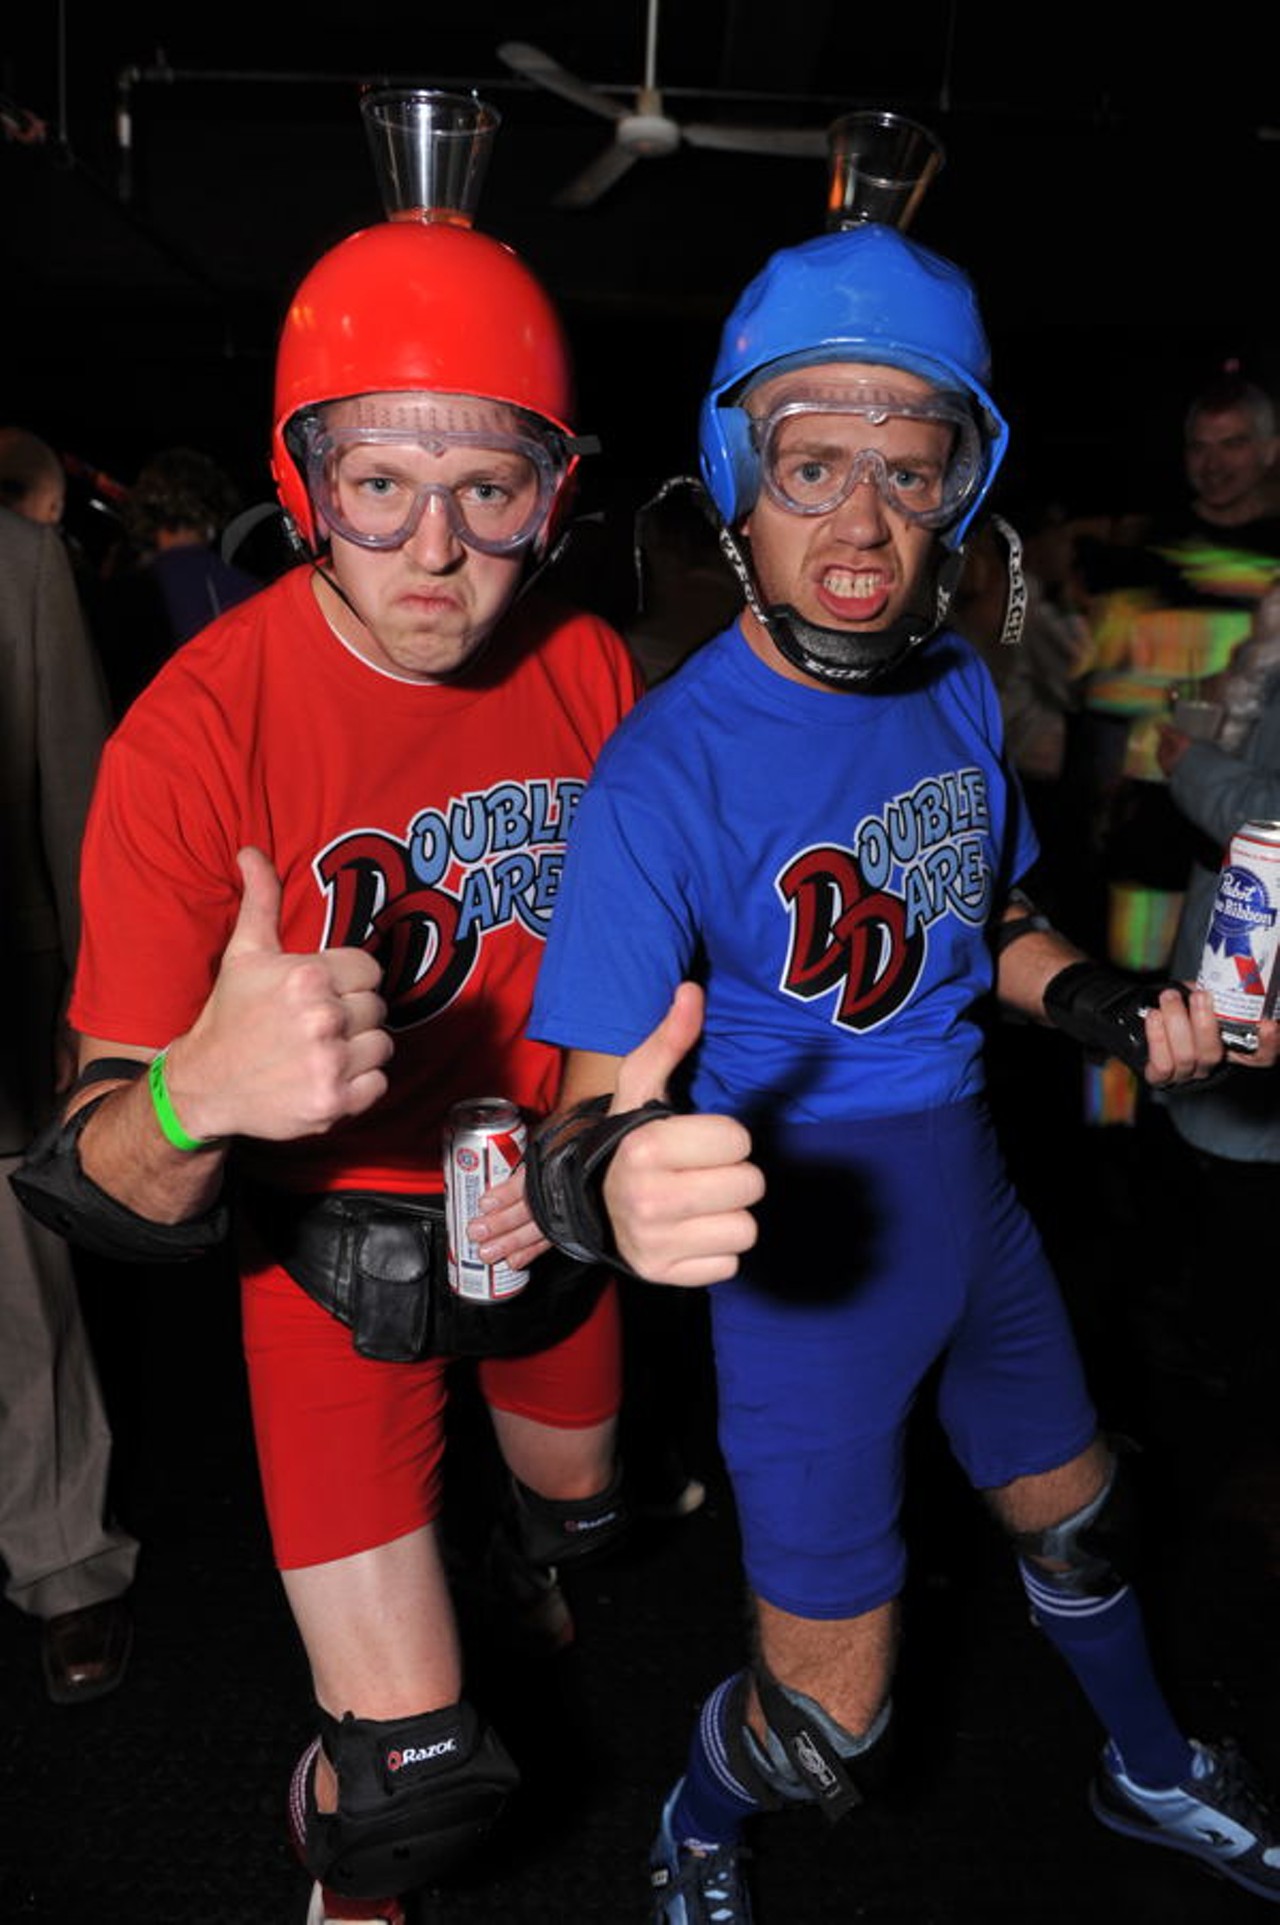 Double Dare contestants at the First Avenue Halloween in Minneapolis.